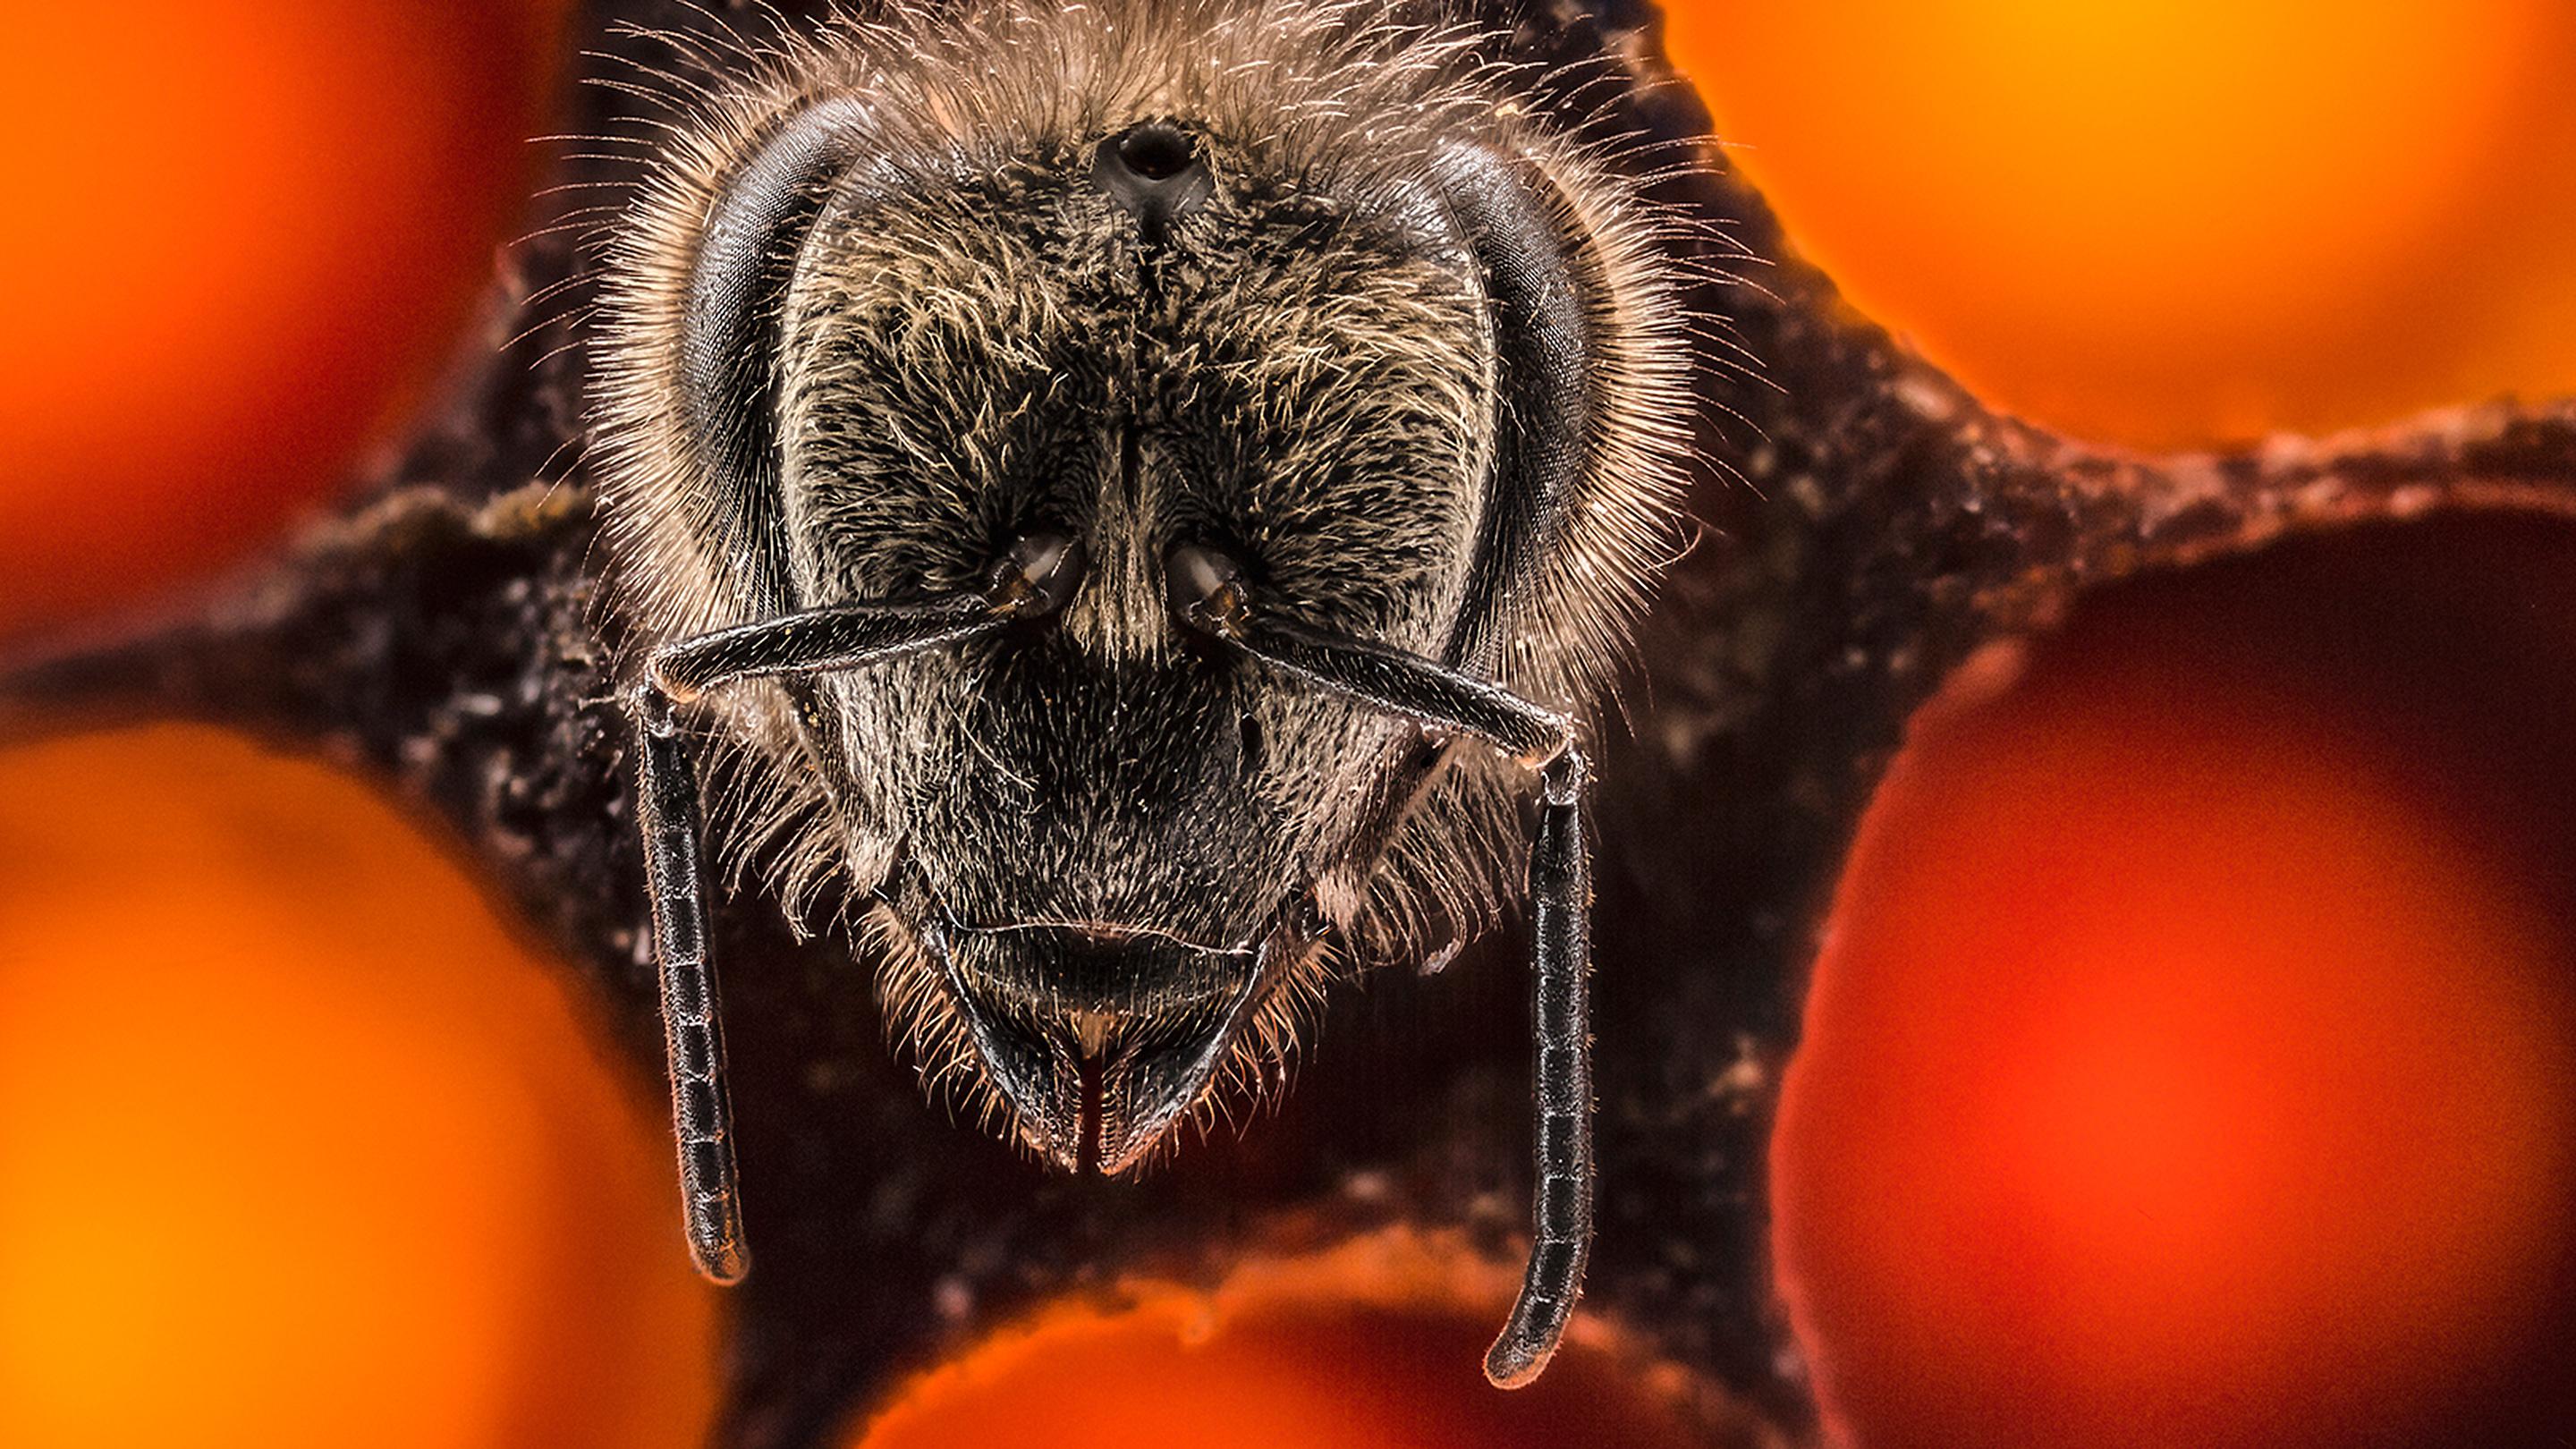 A Brilliant Time Lapse Video on the First 21 Days of a Bee’s Life by an Indian American Photographer